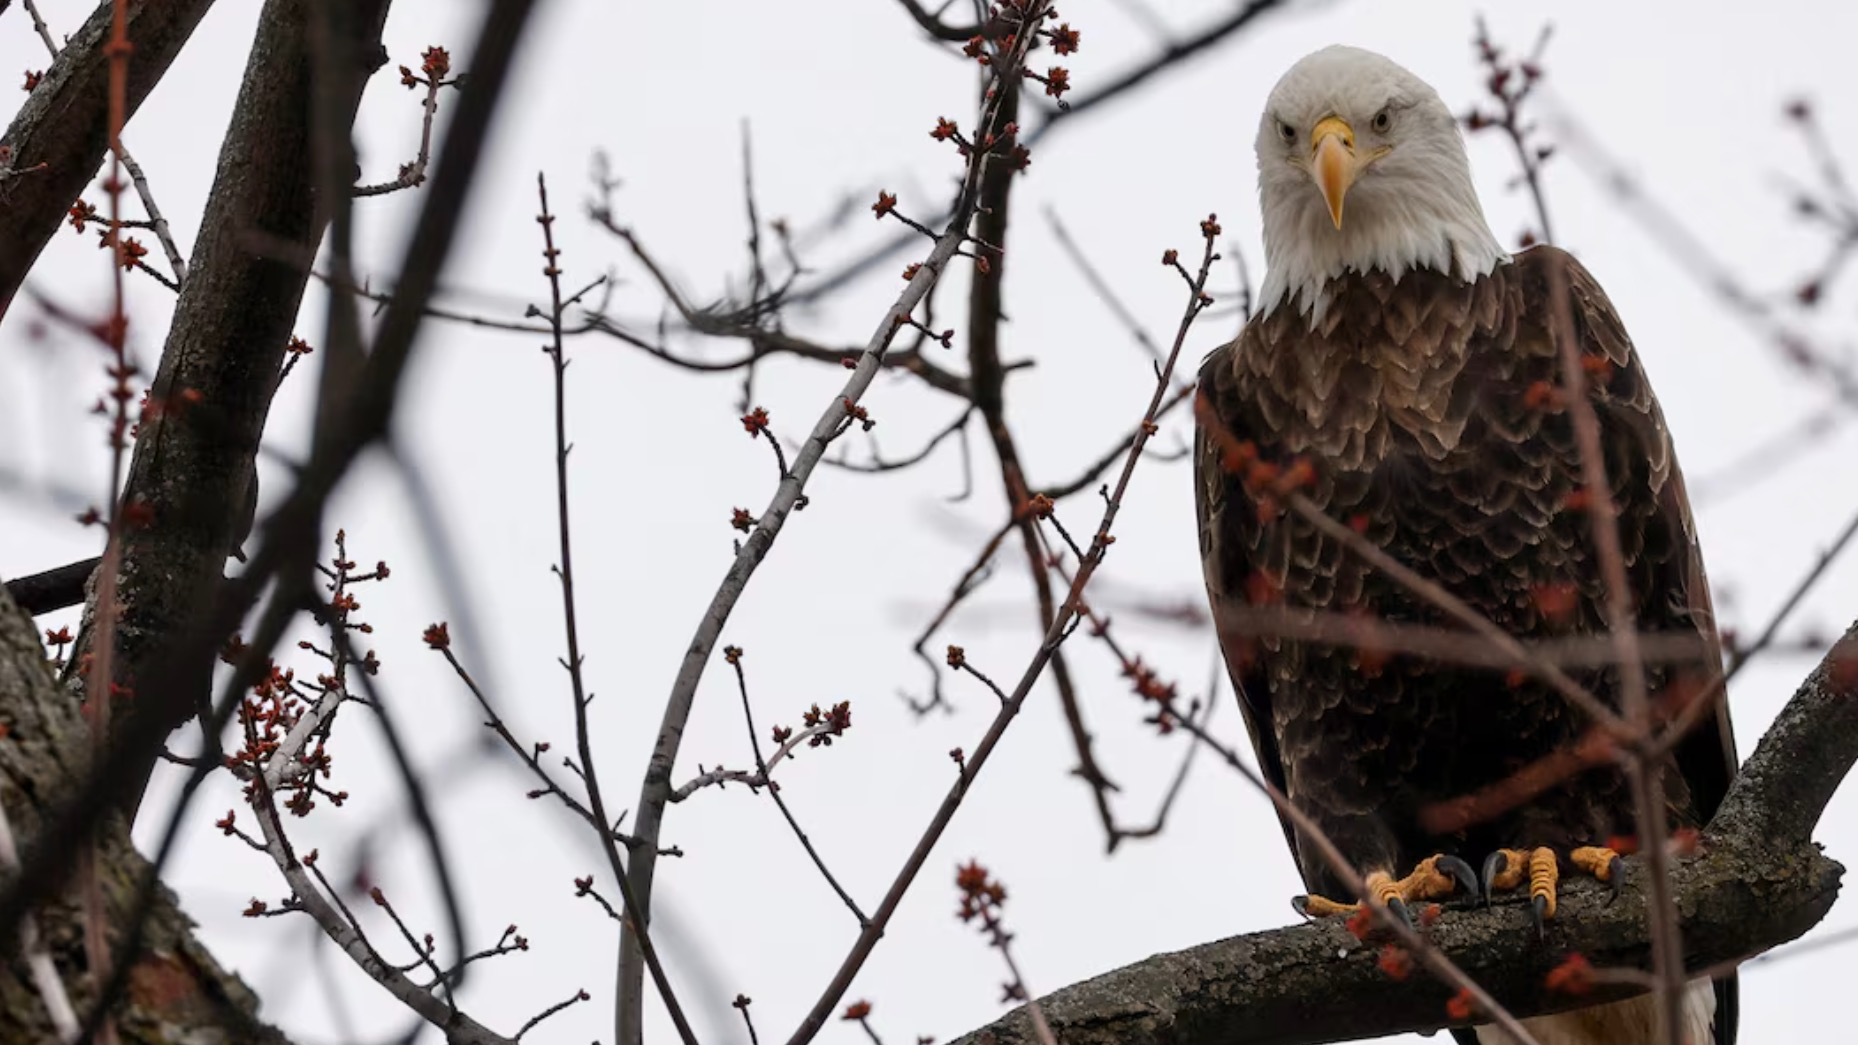 A bald eagle perches on a tree in LeClaire Park in Davenport, Iowa, U.S., March 12, 2023. /Reuters